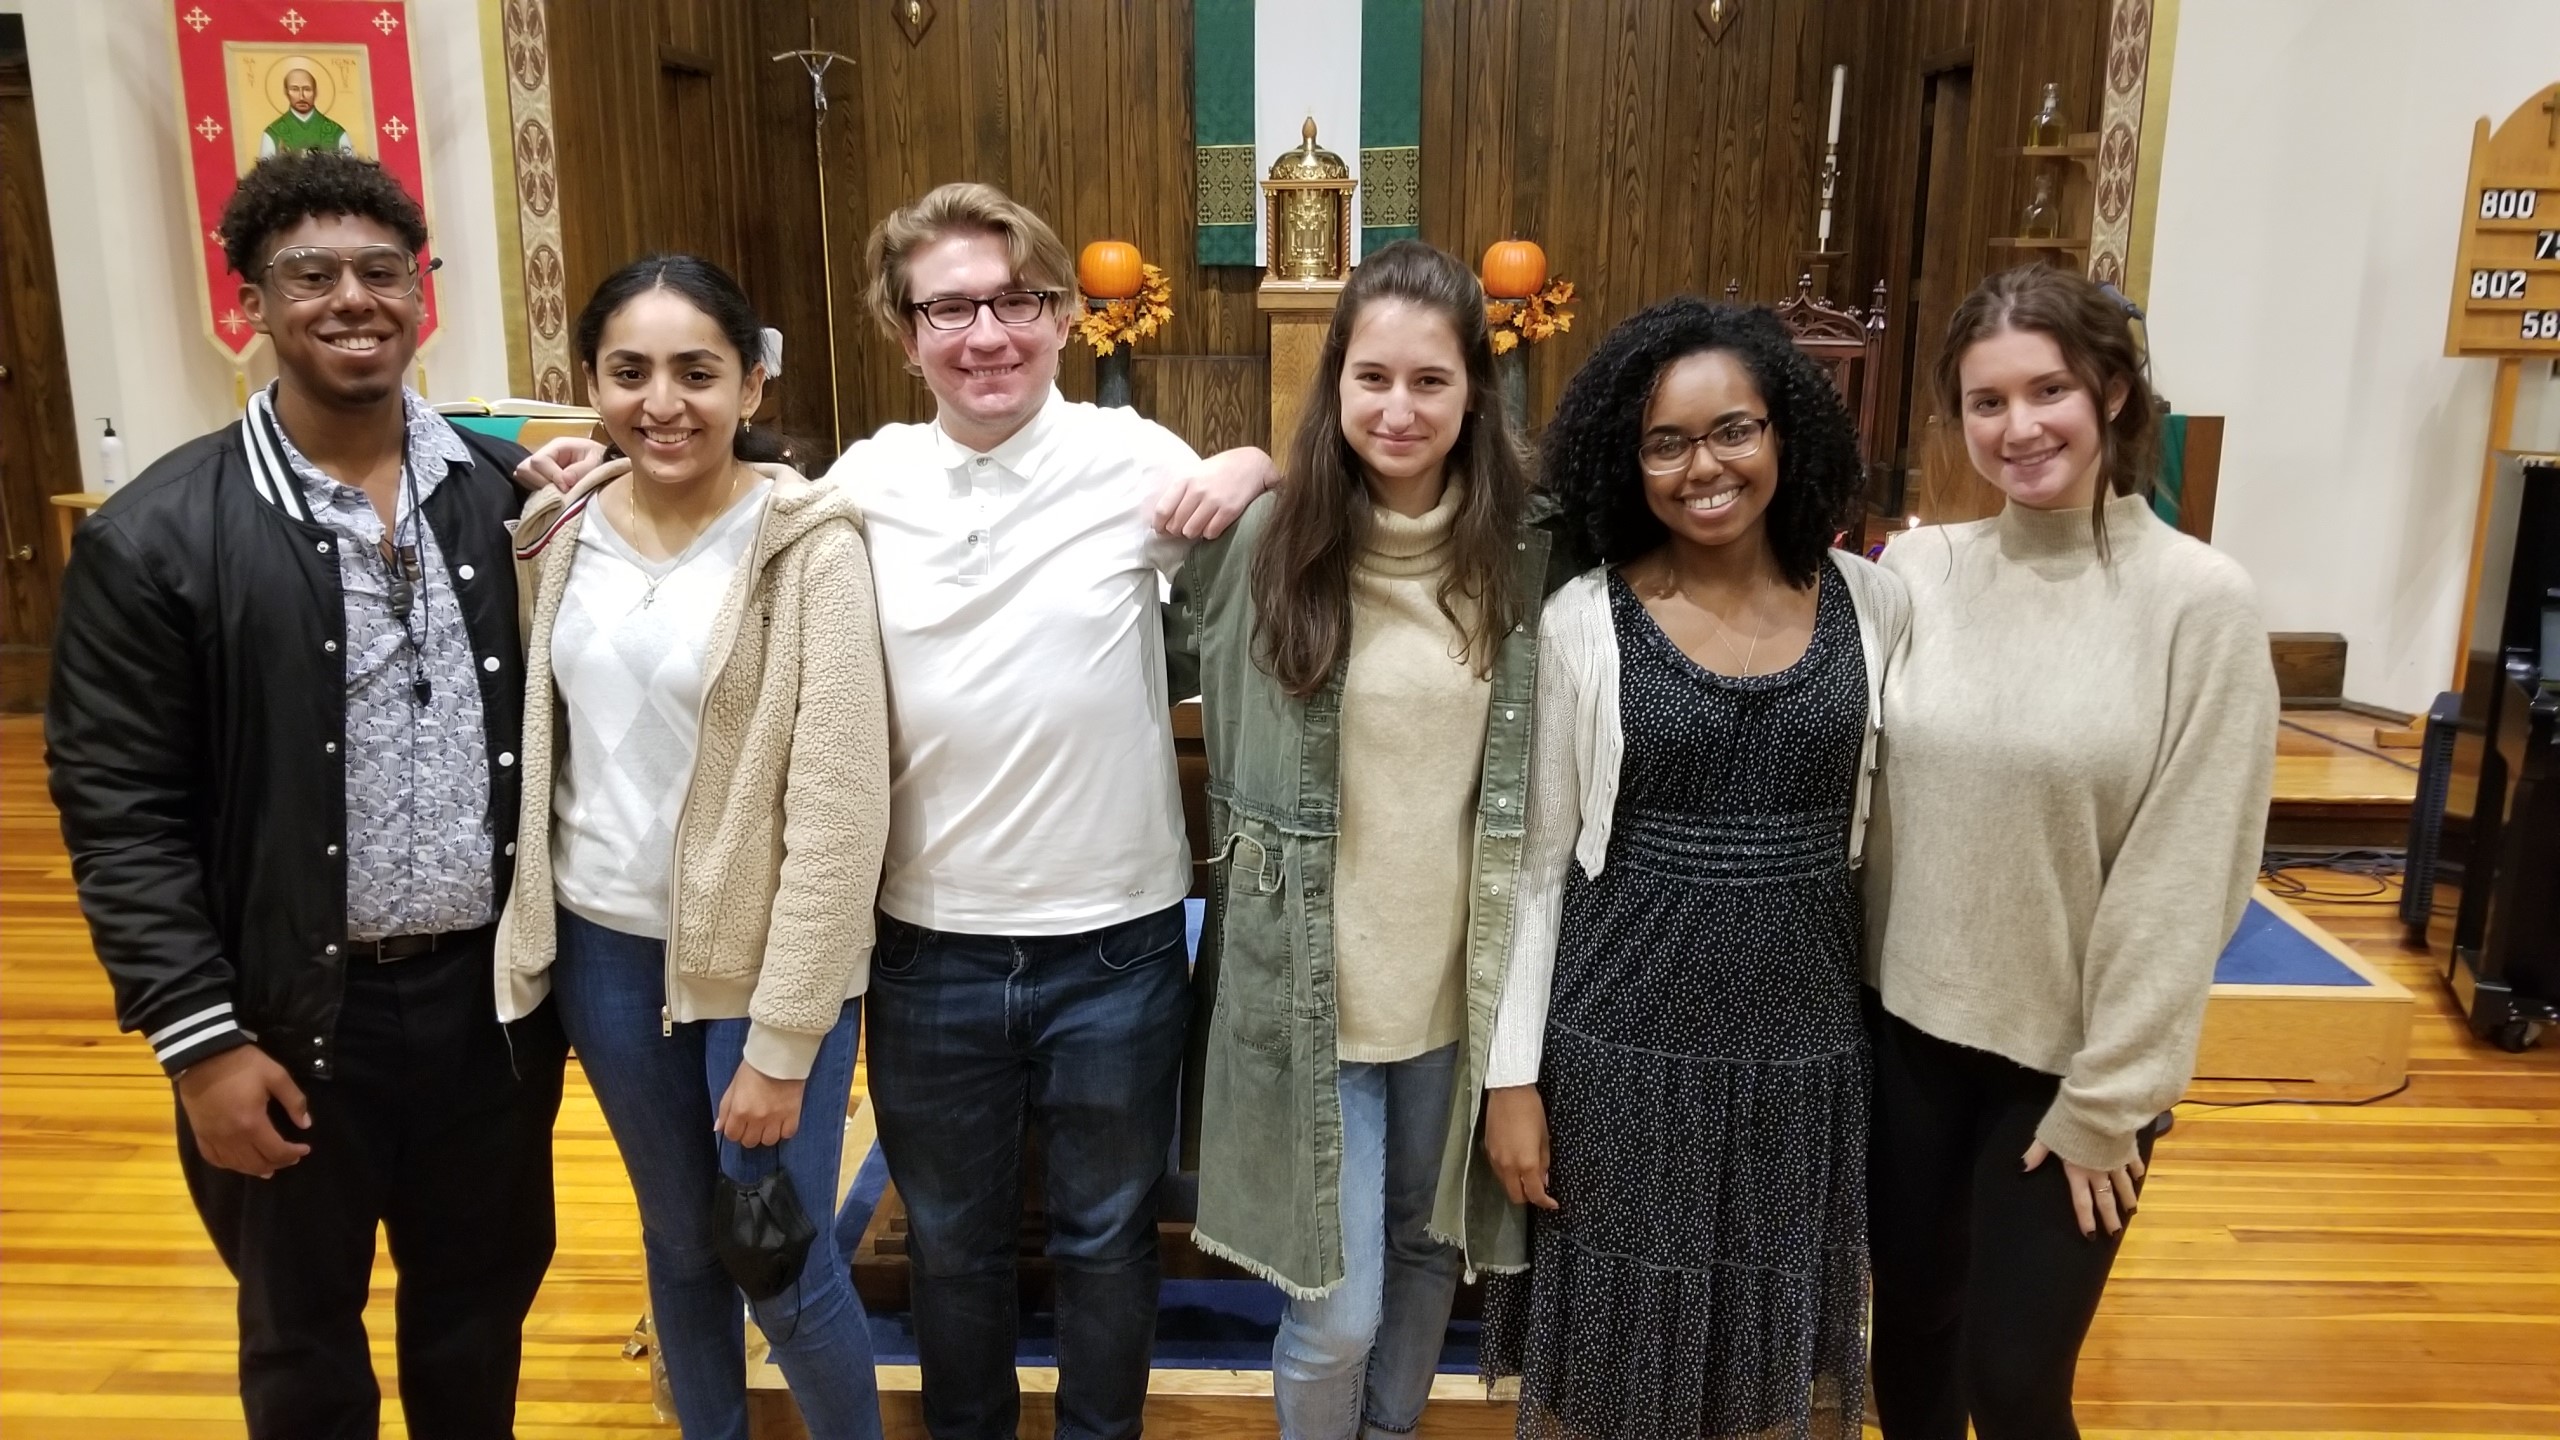 Pictured, from left:Awni Pimentel ’24, Gaby Martinez ’24/Awni’s Sponsor, Michael Juraga ’24,Maggie Oberlies ‘25/Michael’s sponsor, Nia Long ’22, Linda Gjona ‘22/Nia’s sponsor